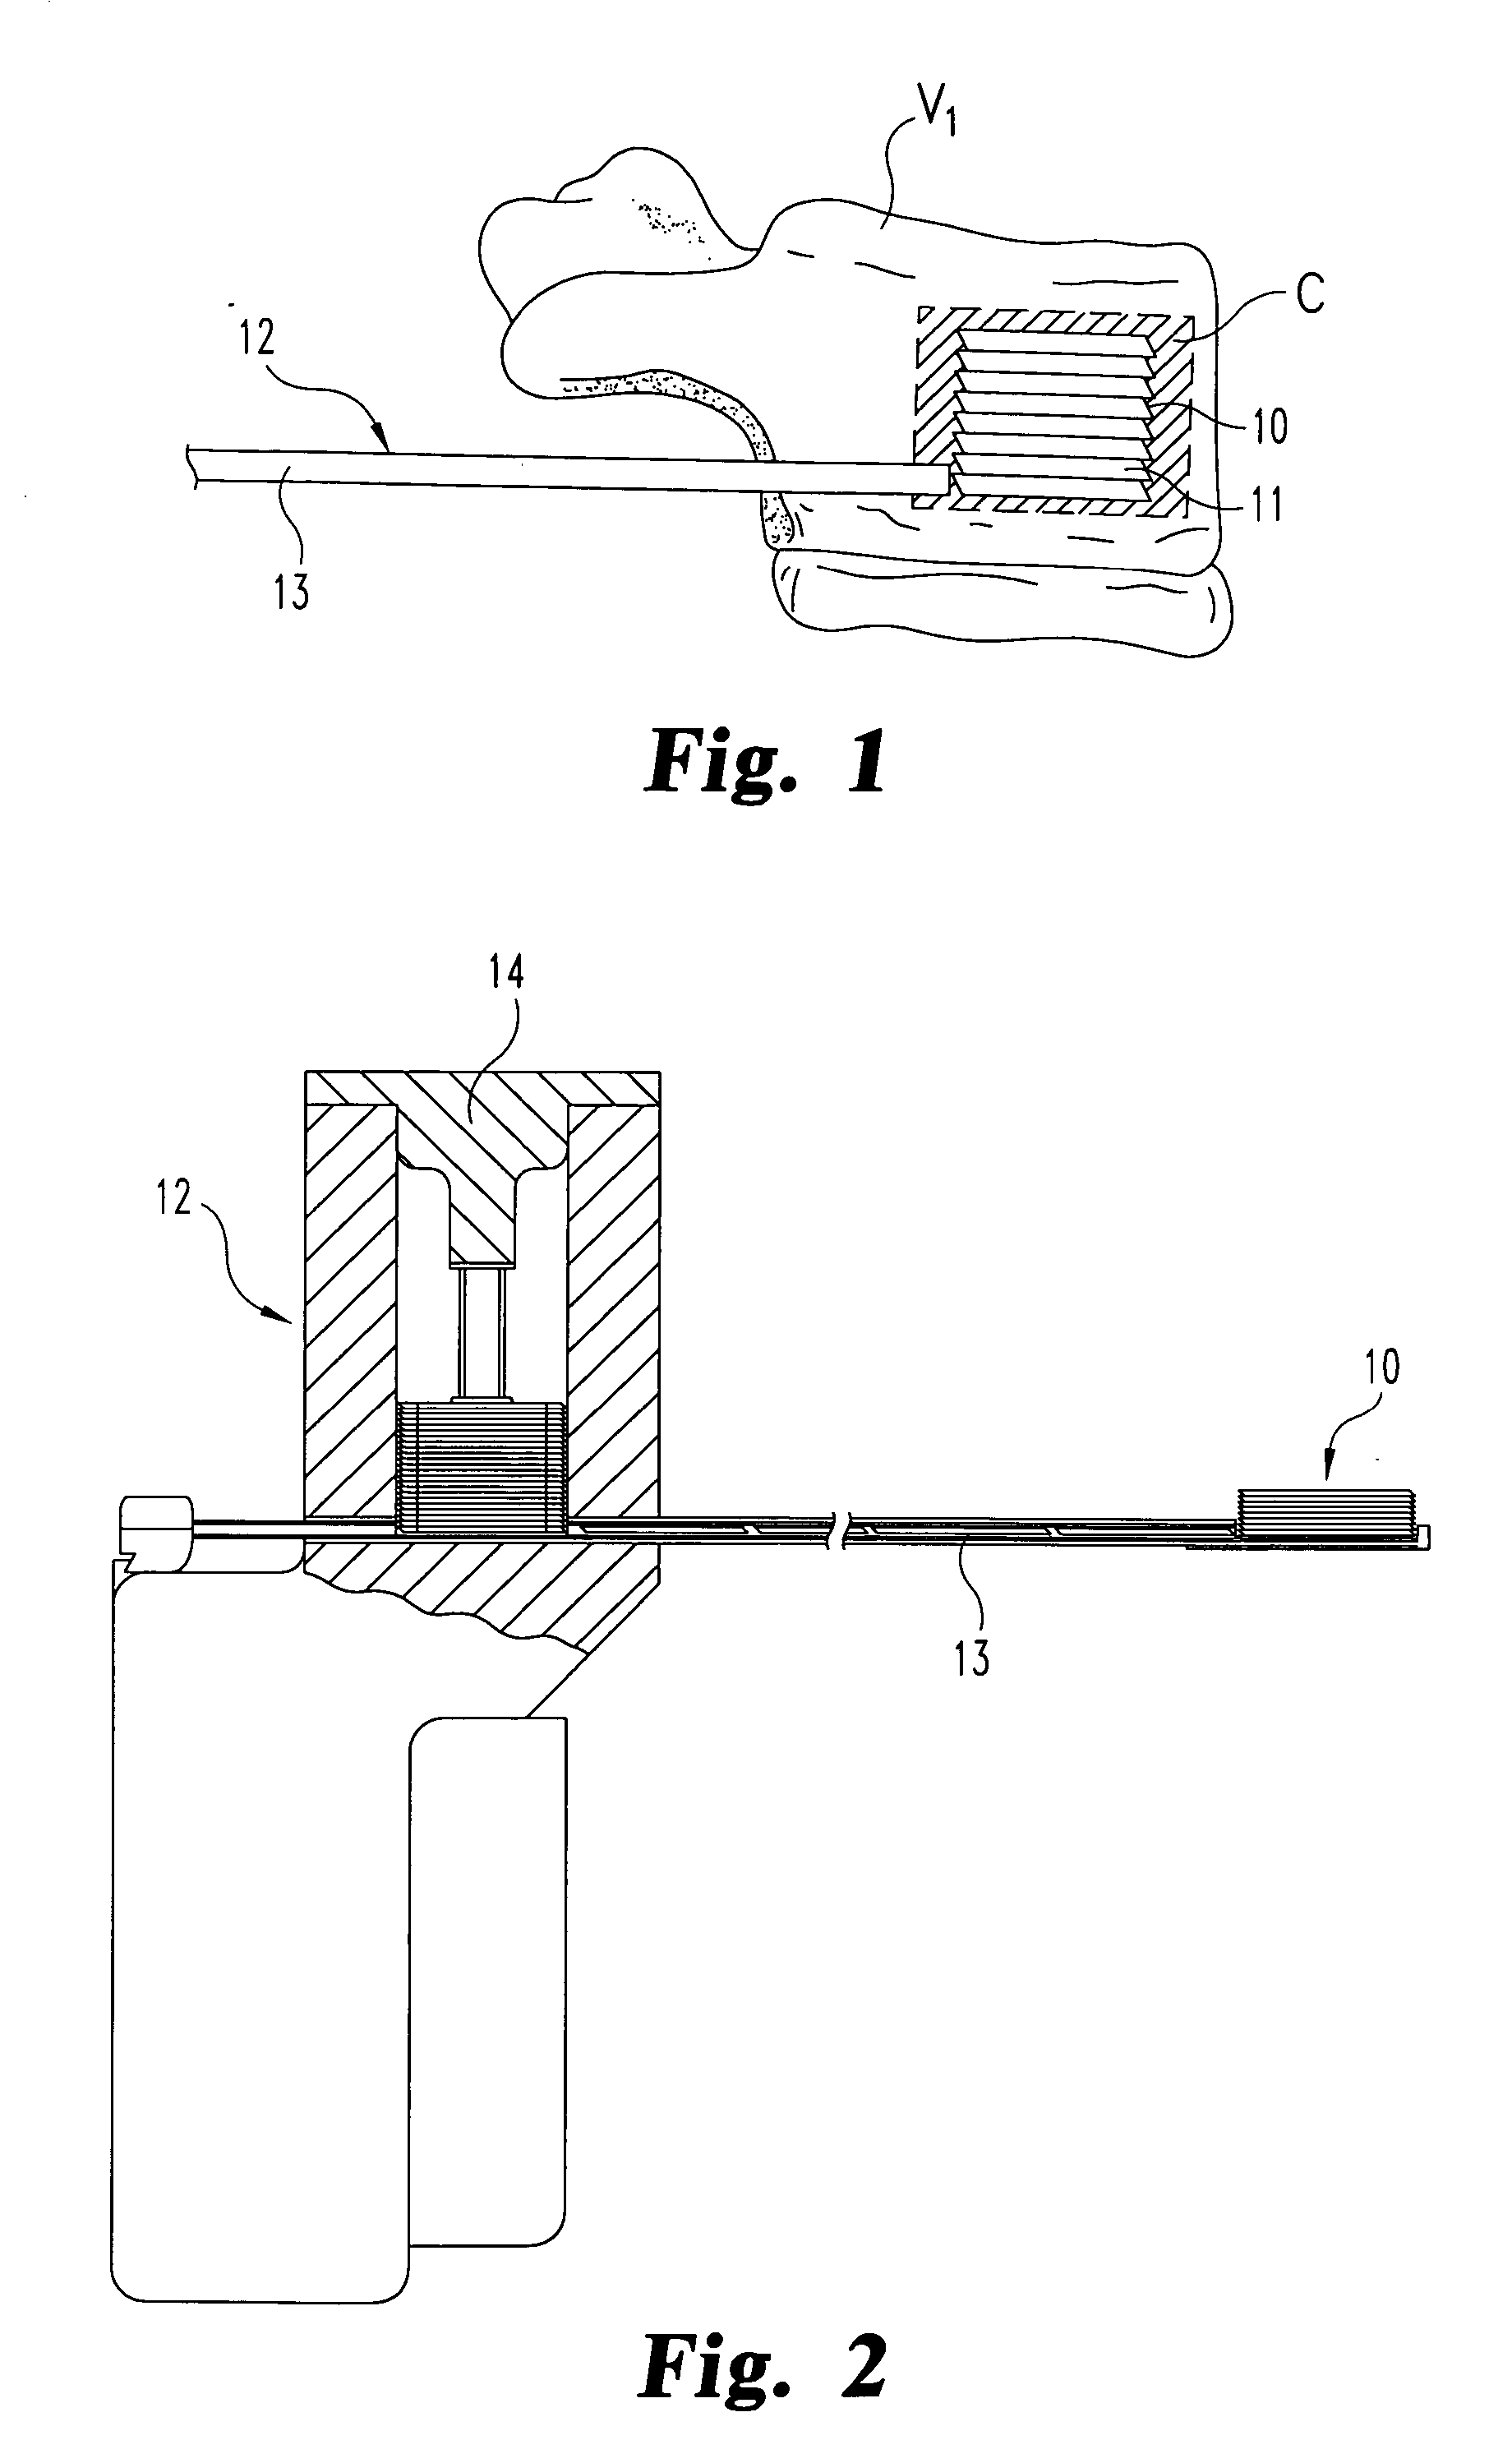 Apparatus and method for injecting fluent material at a distracted tissue site